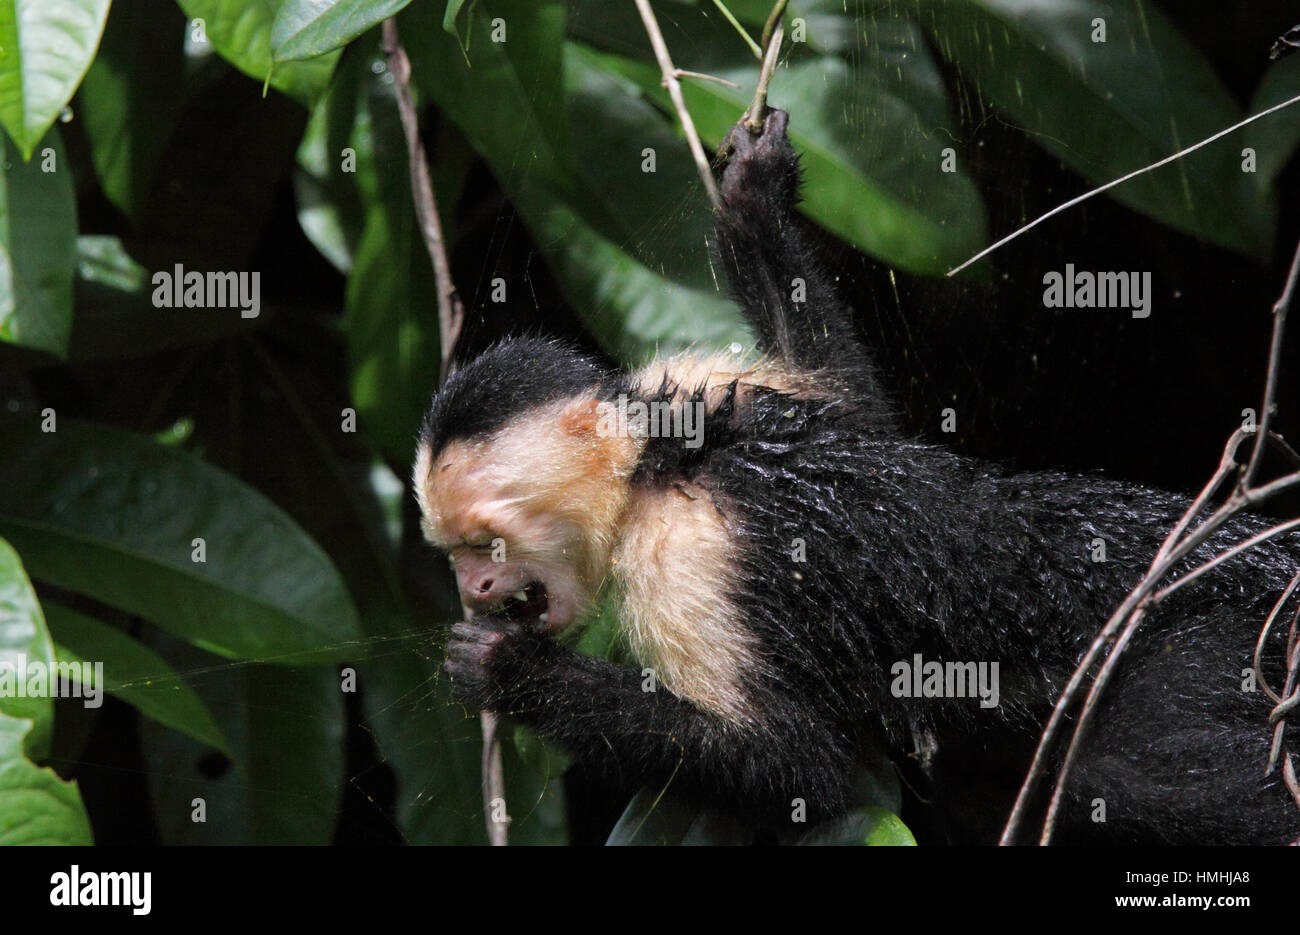 White-faced Capuchin Monkey (Cebus capucinus) eating a Golden Orb Spider (Nephila clavipes) from its web, Tortuguero National Park, Costa Rica. Stock Photo